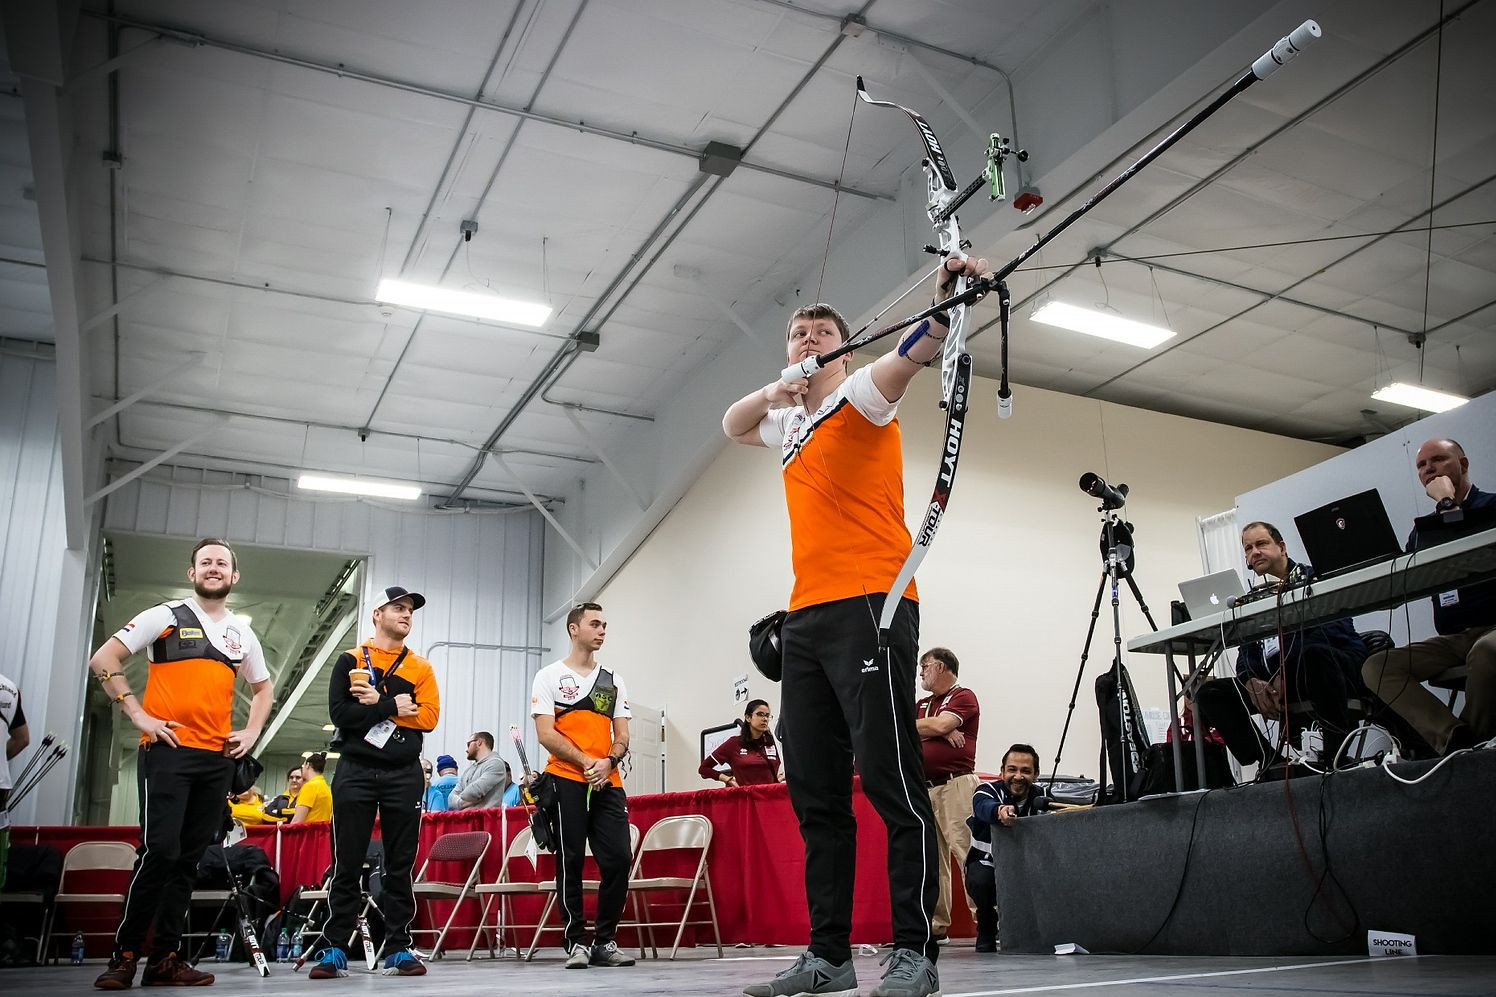 Favourites Netherlands through to men's recurve final at World Archery Indoor Championships